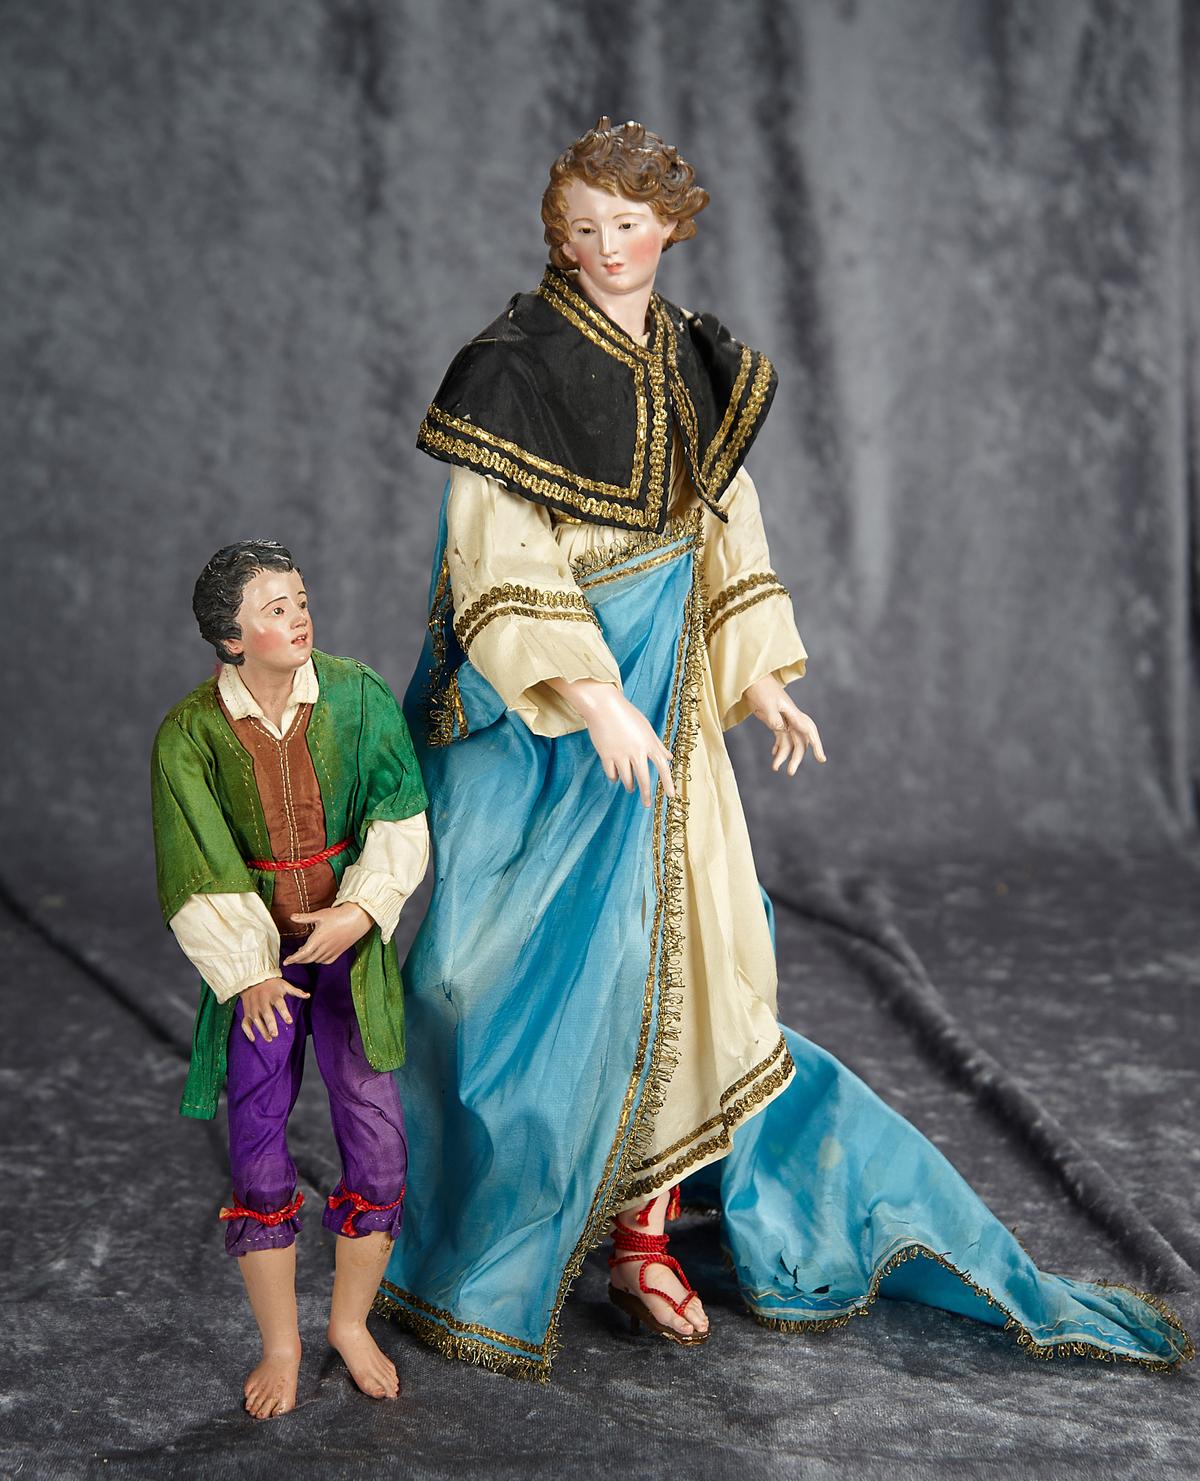 10" & 15" Neopolitan earthenware figures with fine original finish and costumes. $600/800